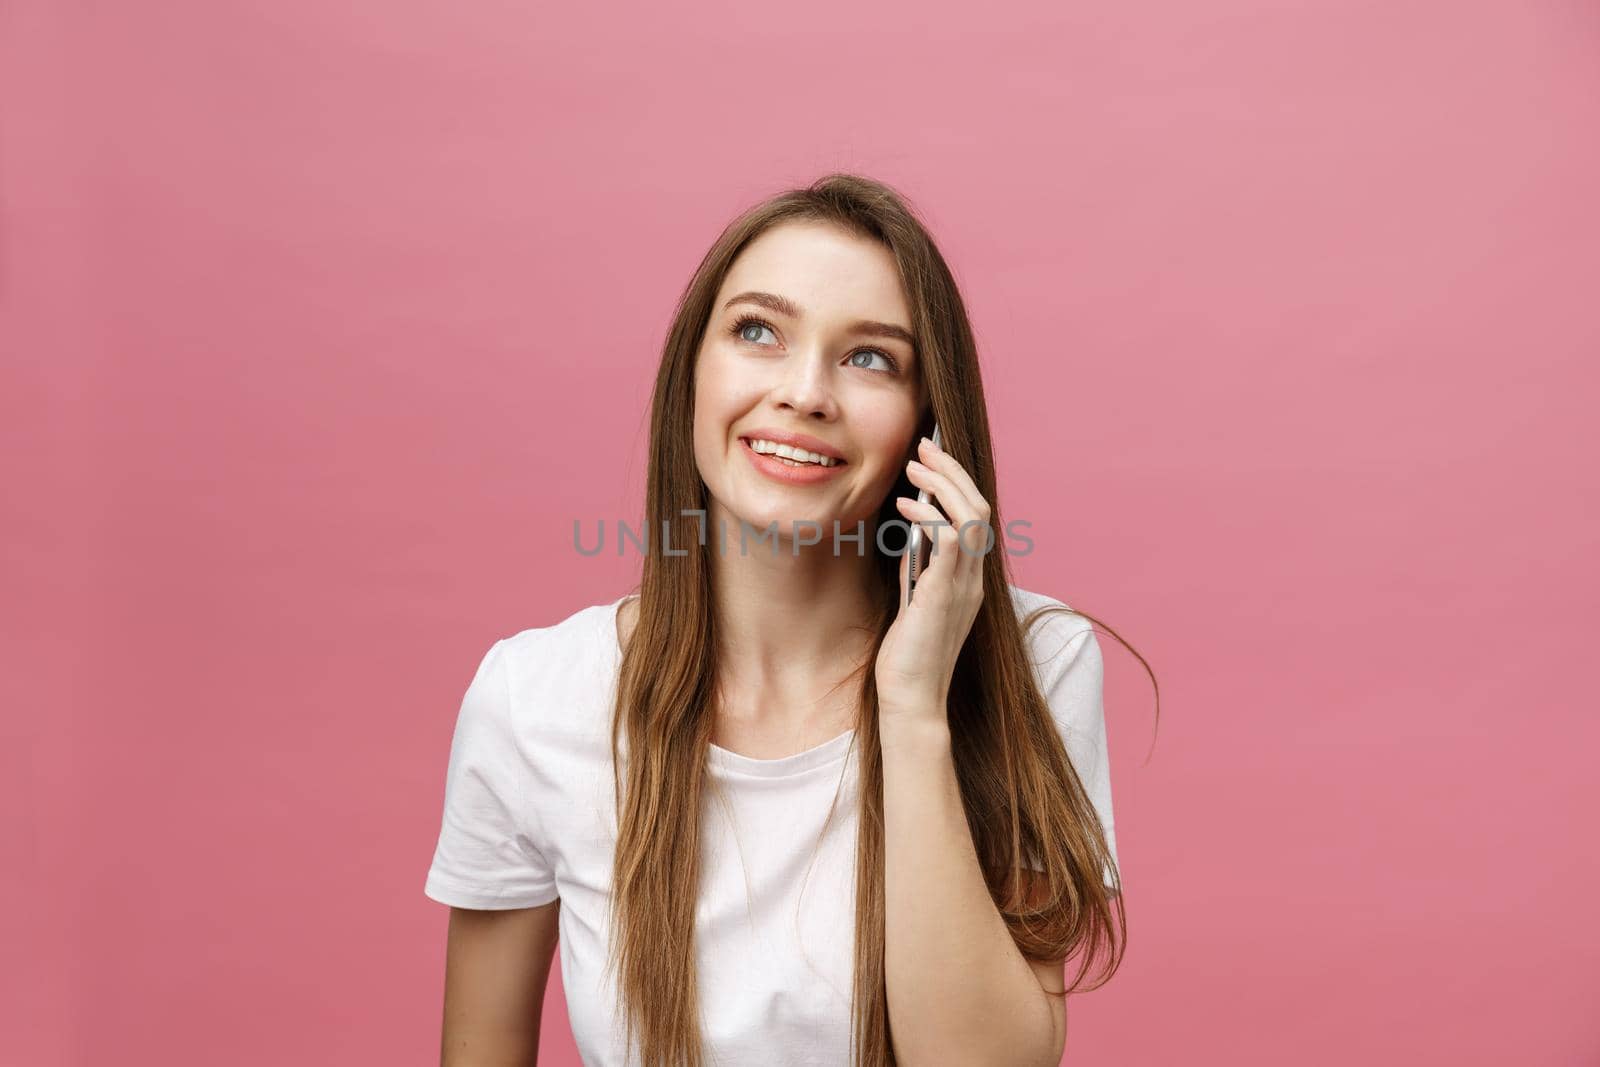 Cheerful young woman talking on mobile phone isolated on pink background.